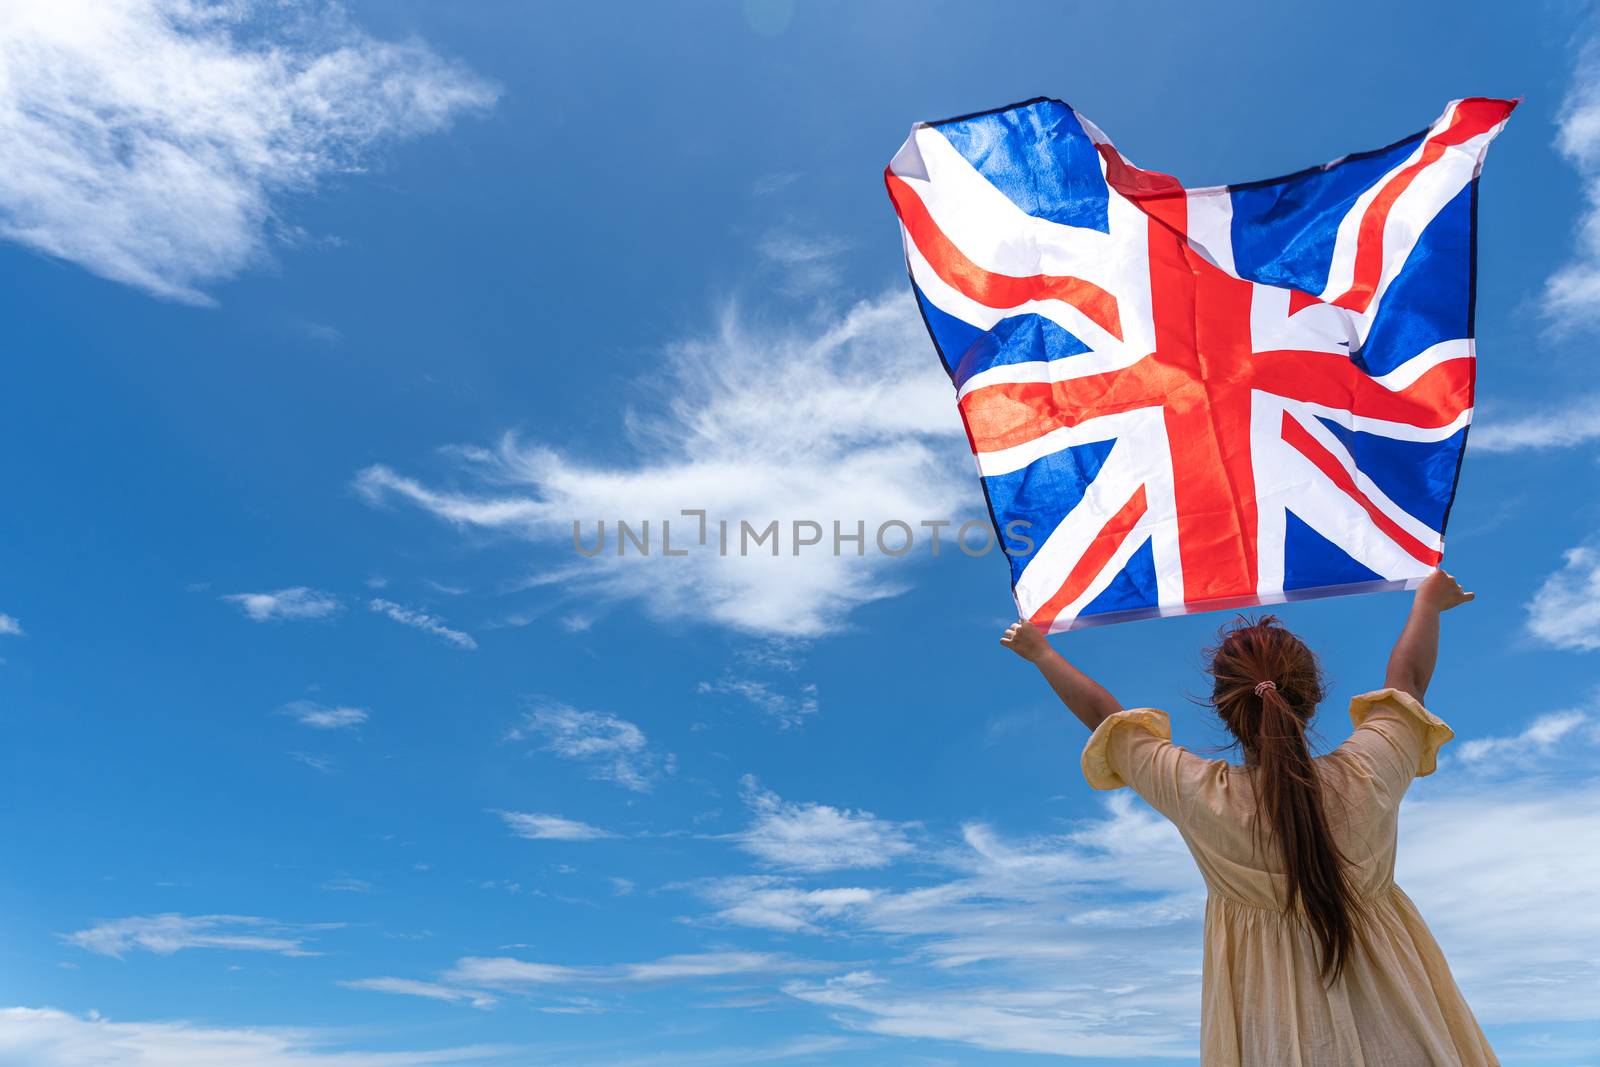 woman standing and holding UK flag under blue sky.